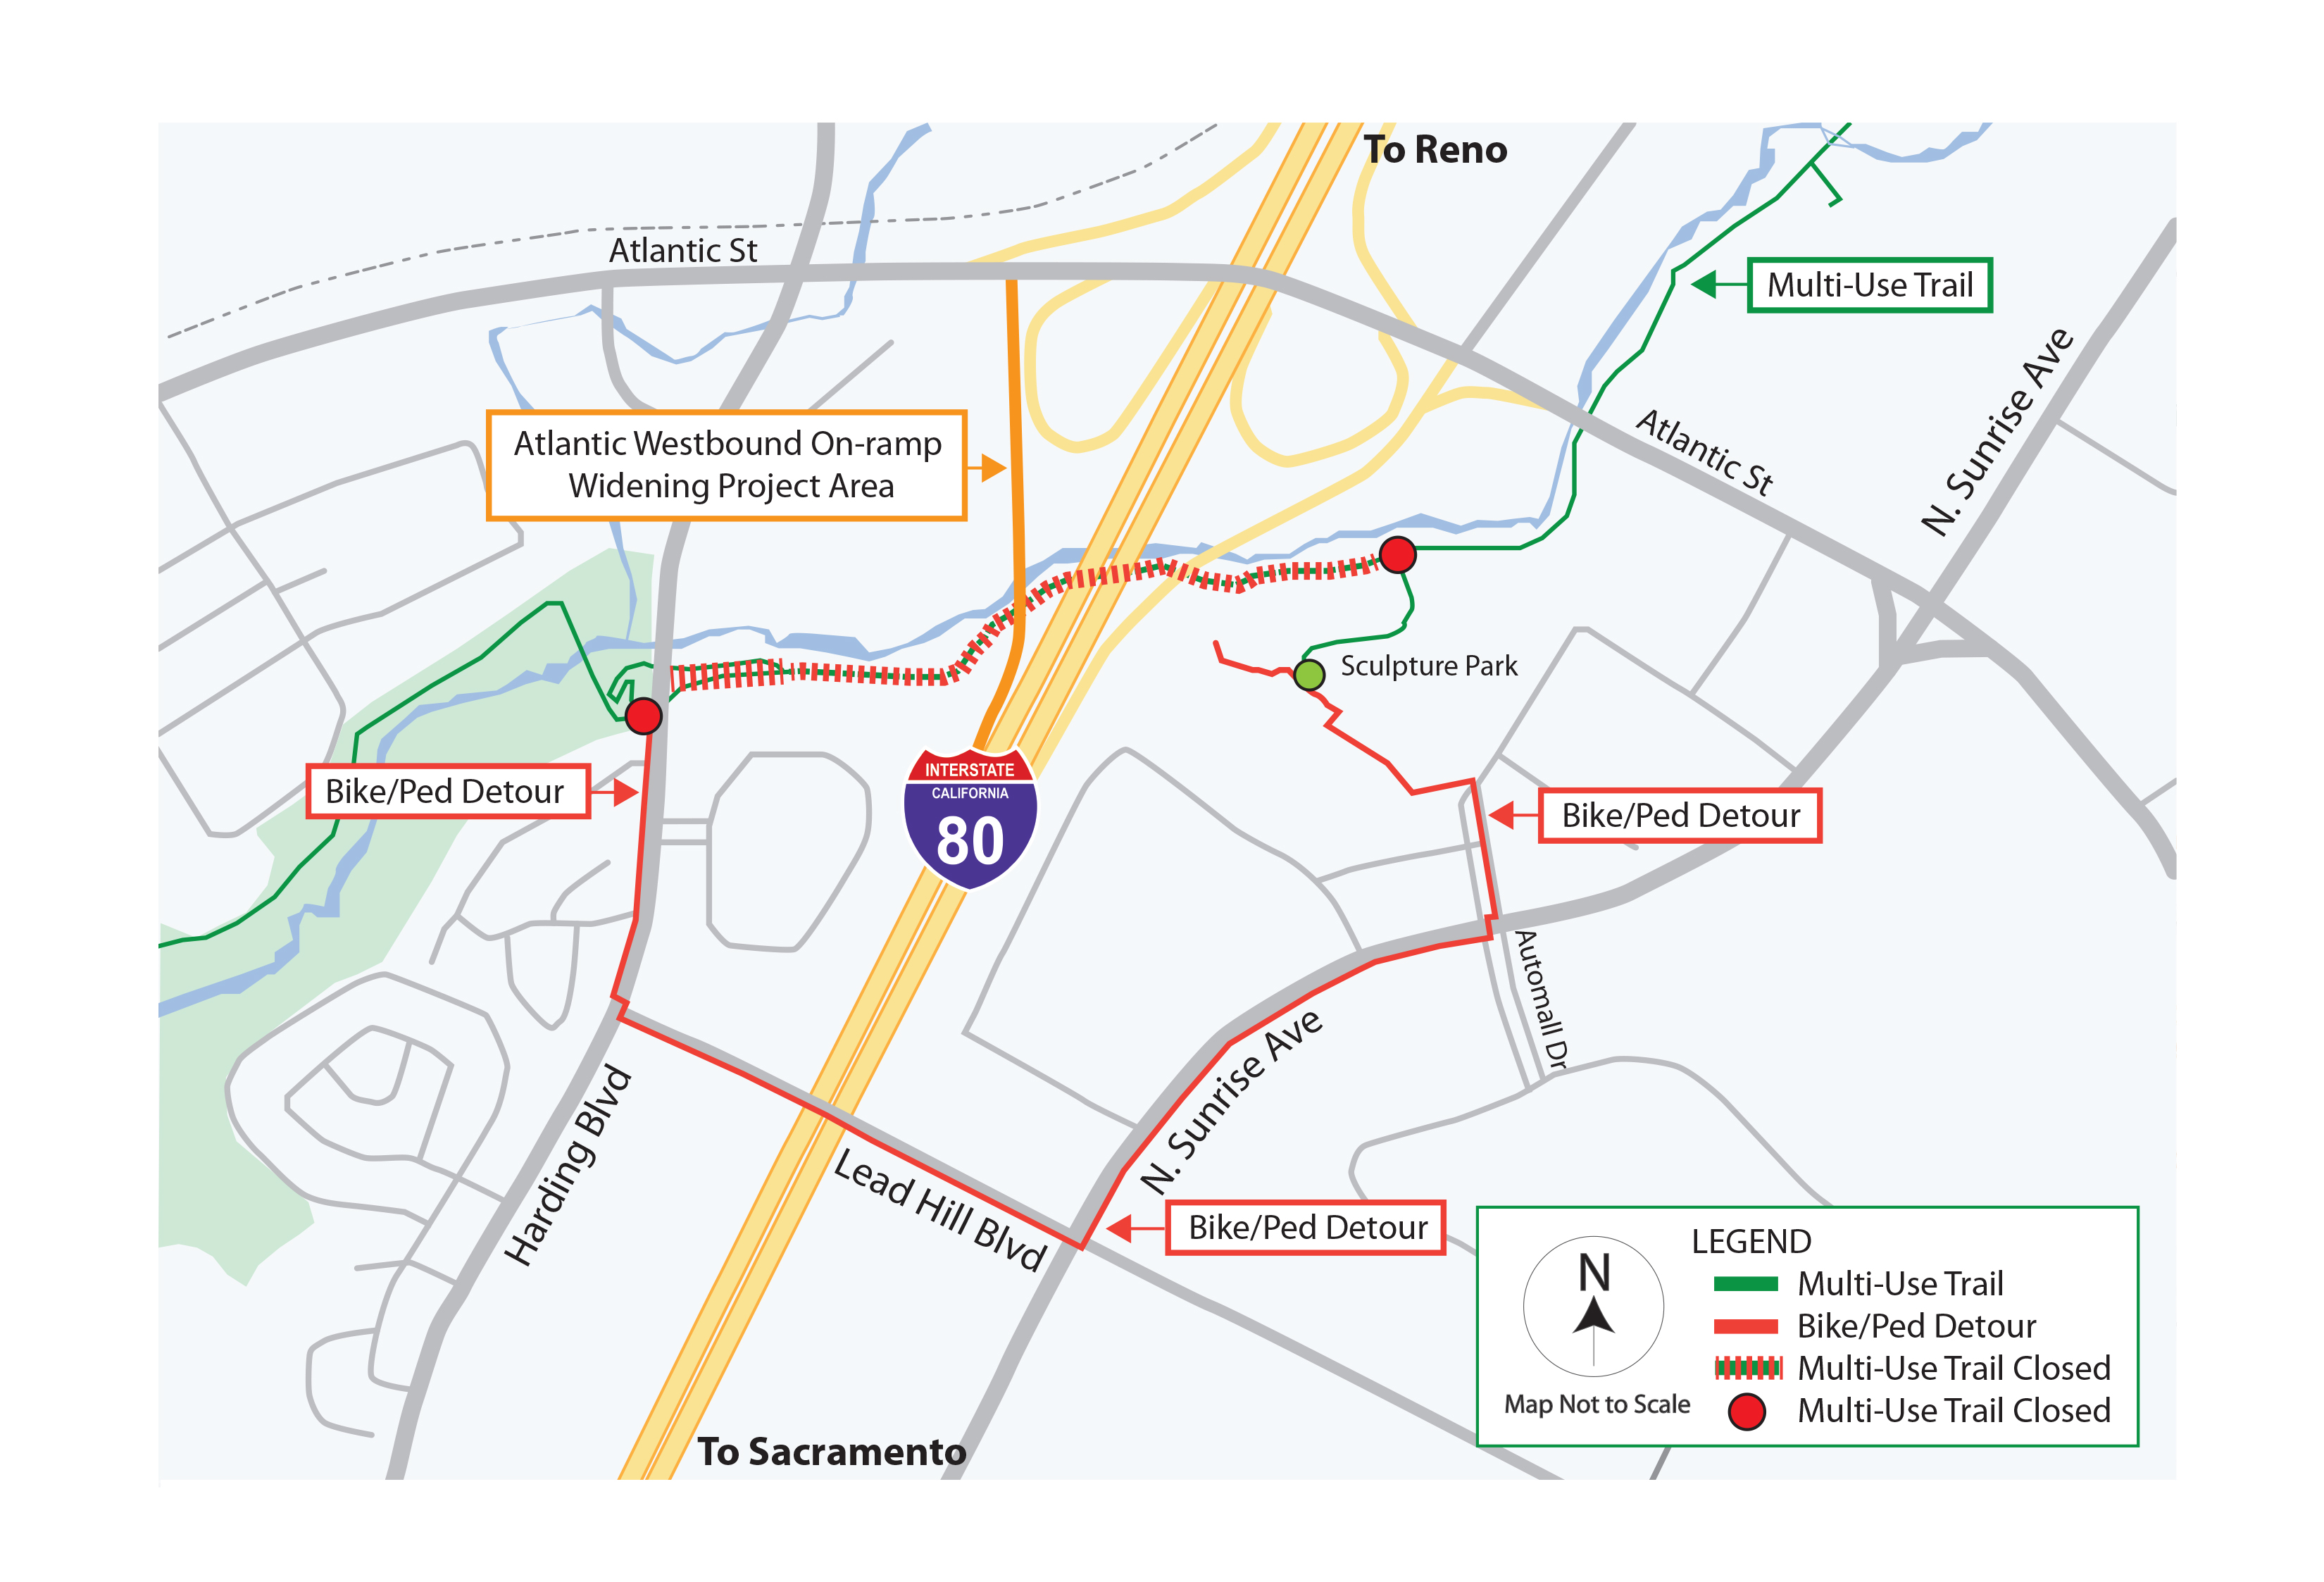 Detour map for the long-term closure of the Miner's Ravine Multi-Use Trail near the I-80 westbound on-ramp at Atlantic Street. Pedestrians and bicyclists are routed through the sculpture park and along N. Sunrise Ave., Lead Hill Blvd., and Harding Blvd. to resume trail access.